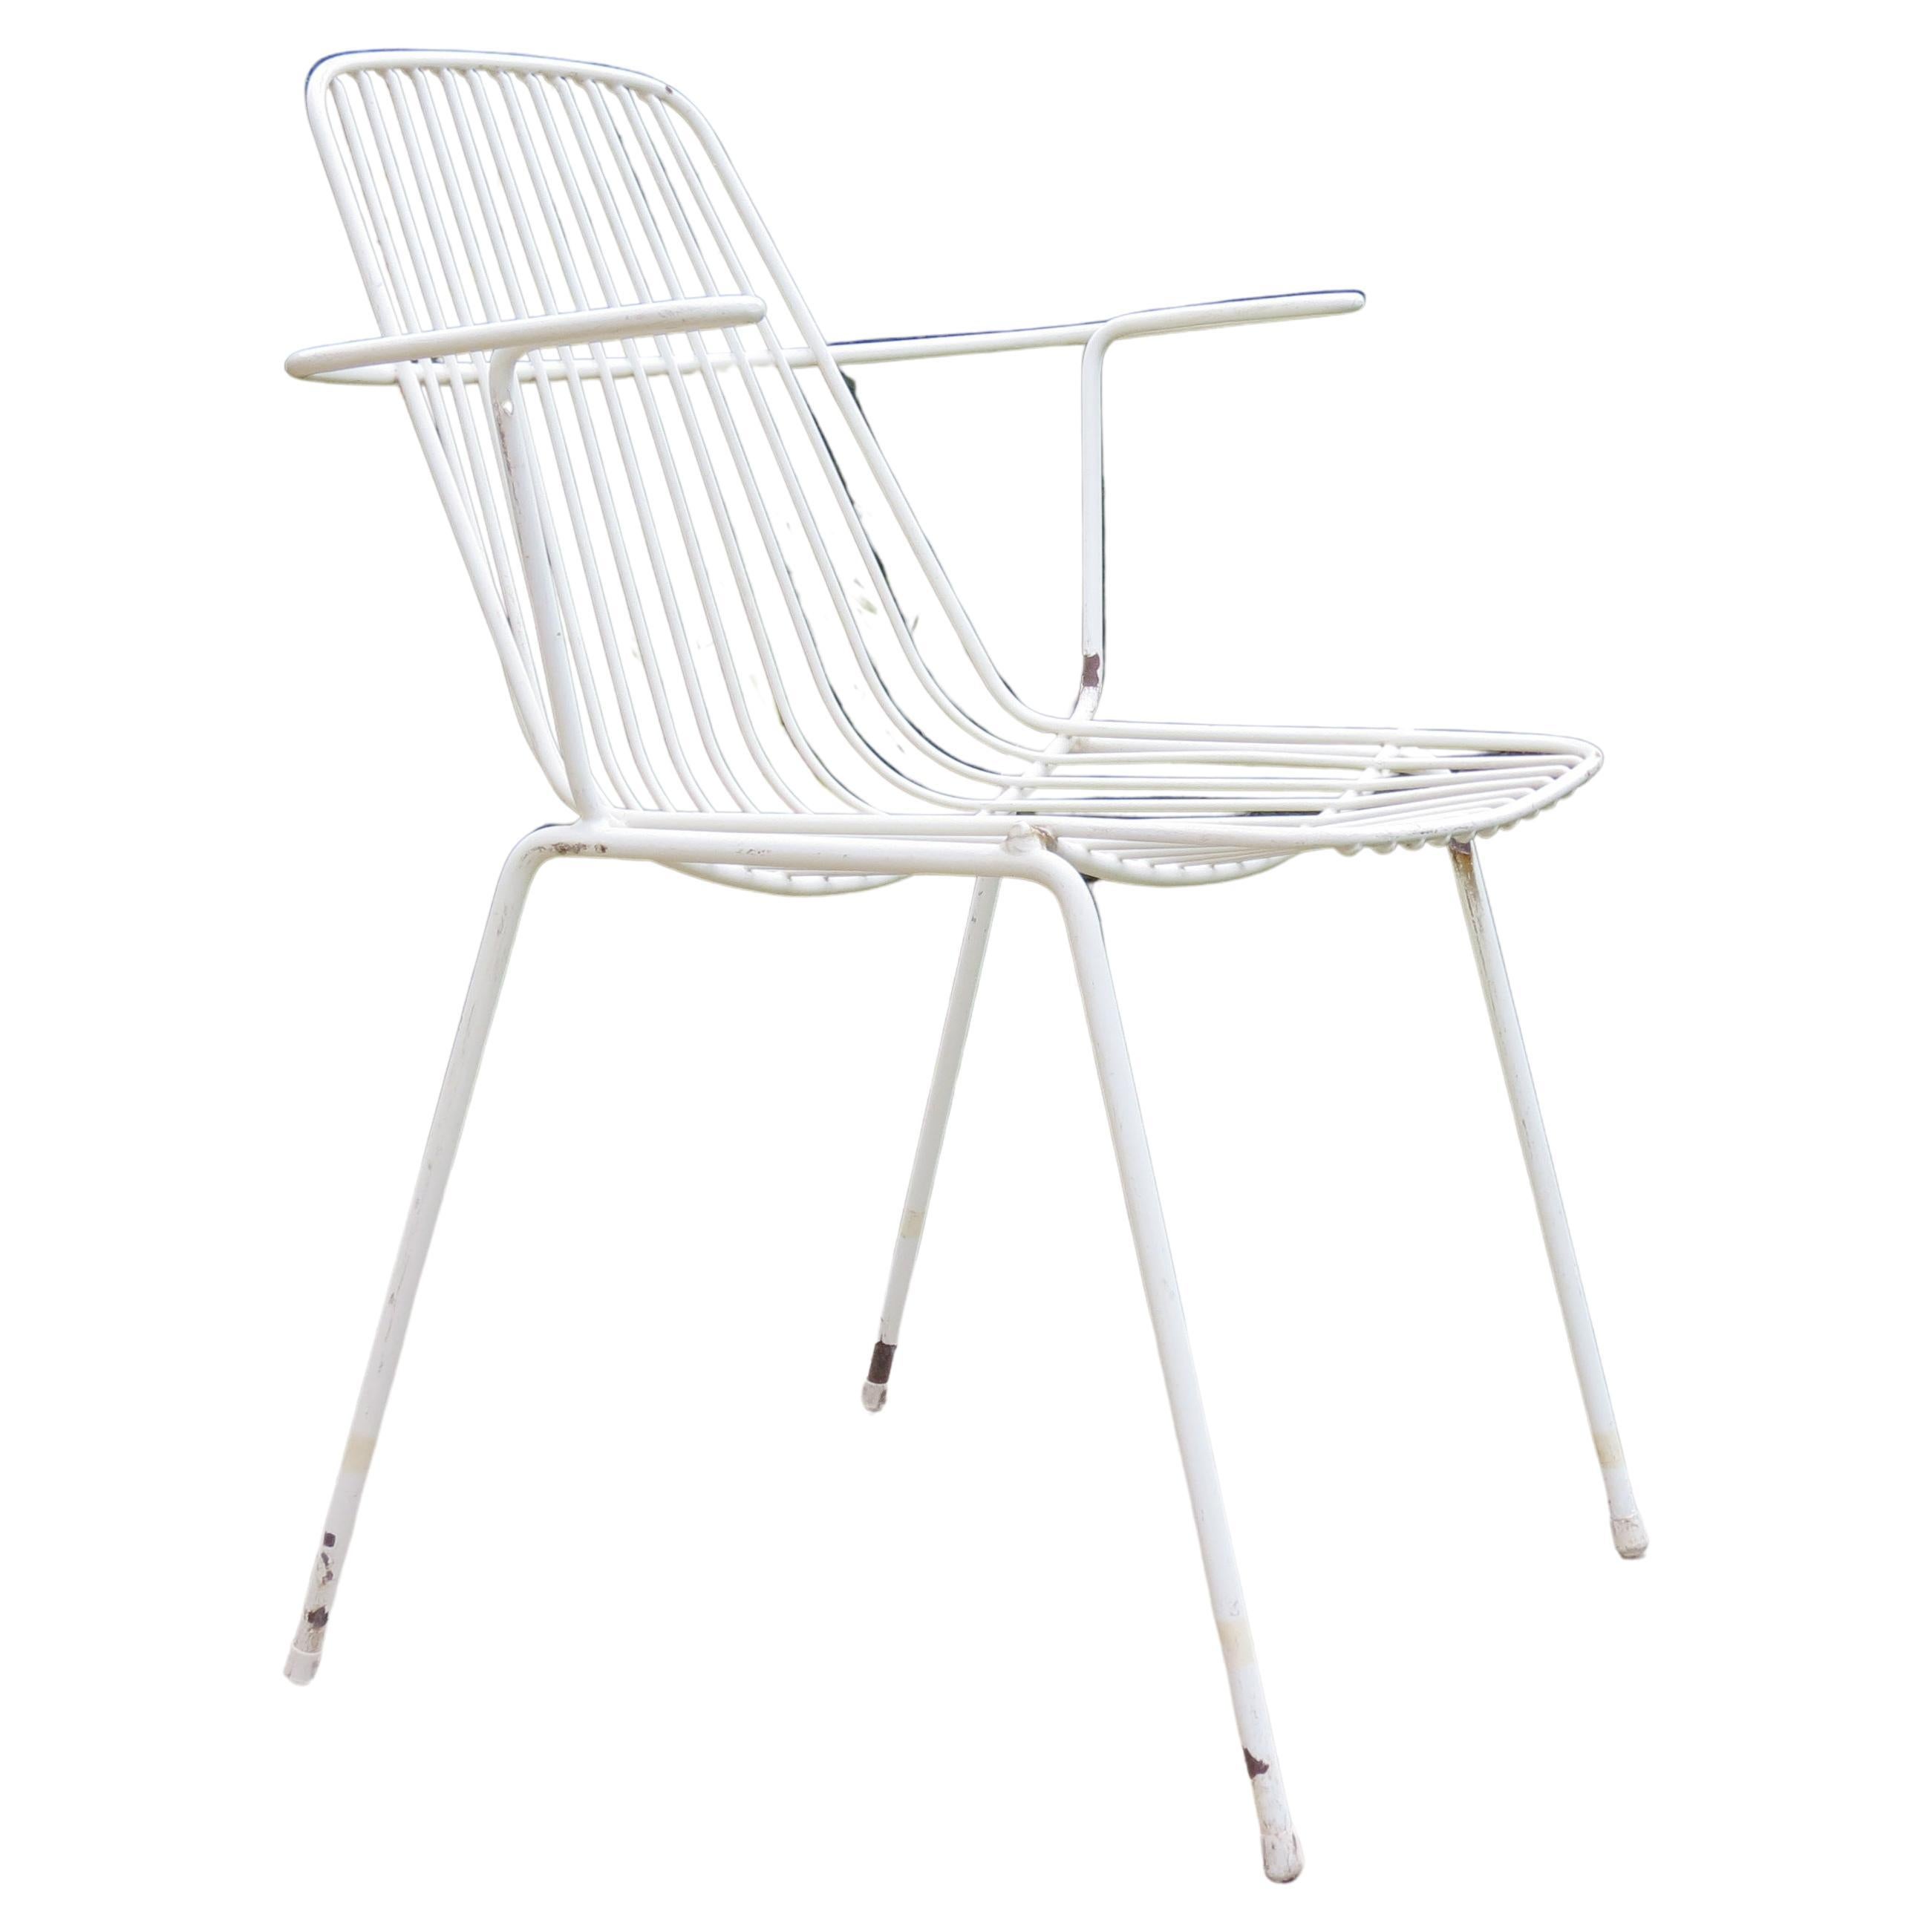 1960s White Metal Midcentury Garden Chair For Sale